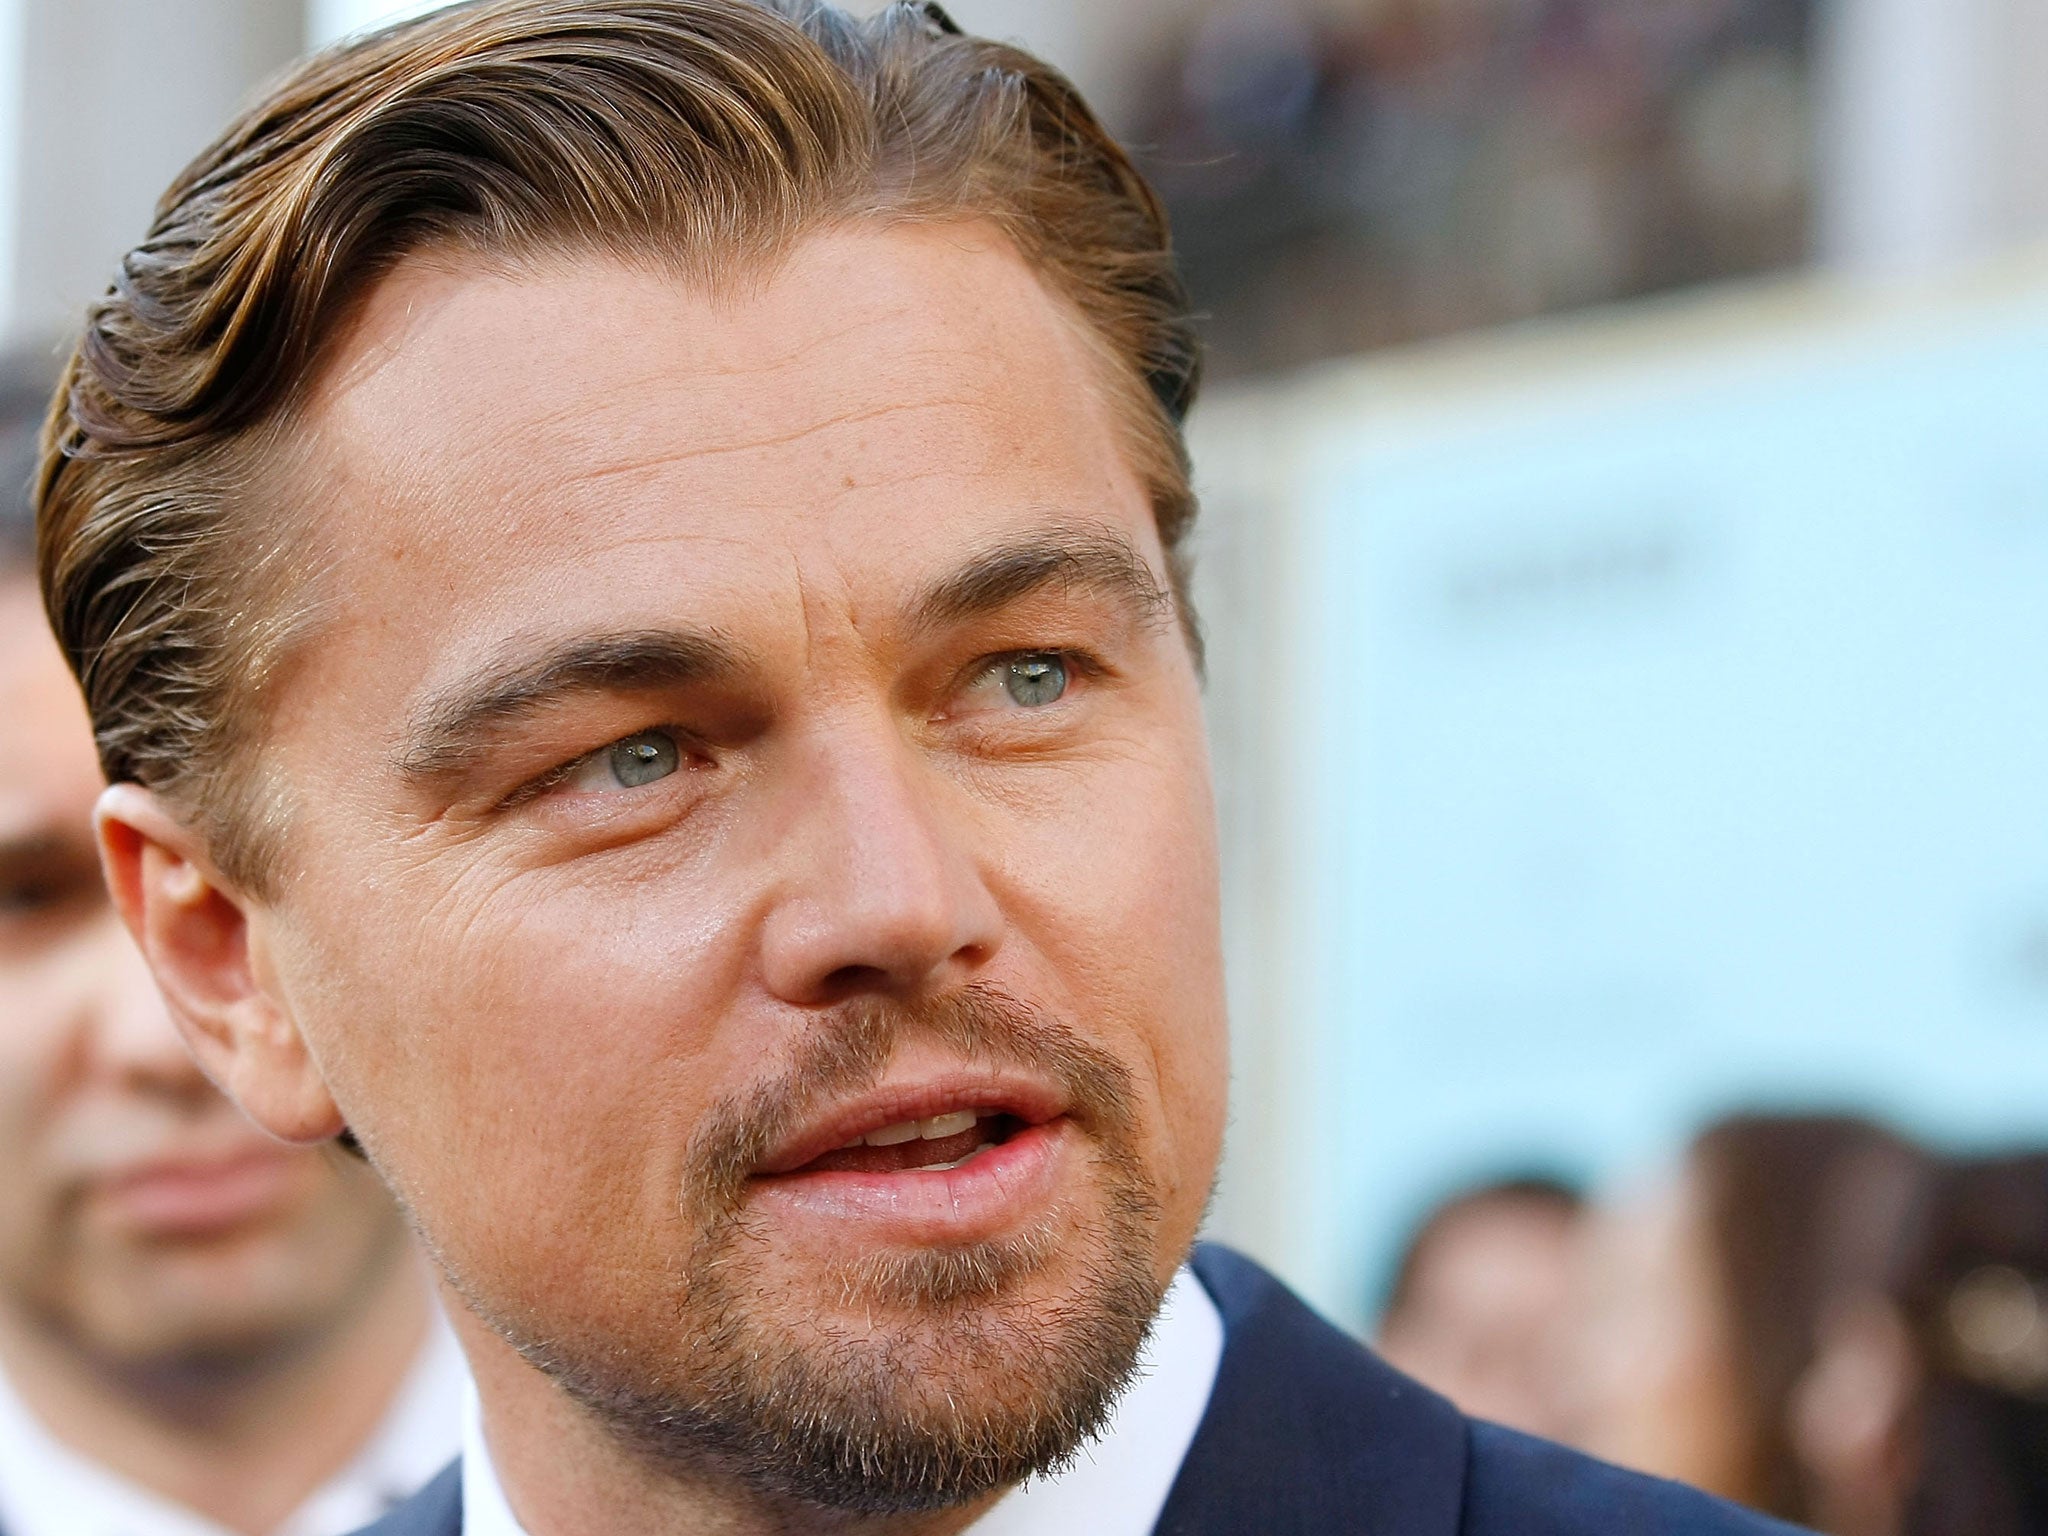 DiCaprio had been in talks to play the late Apple co-founder